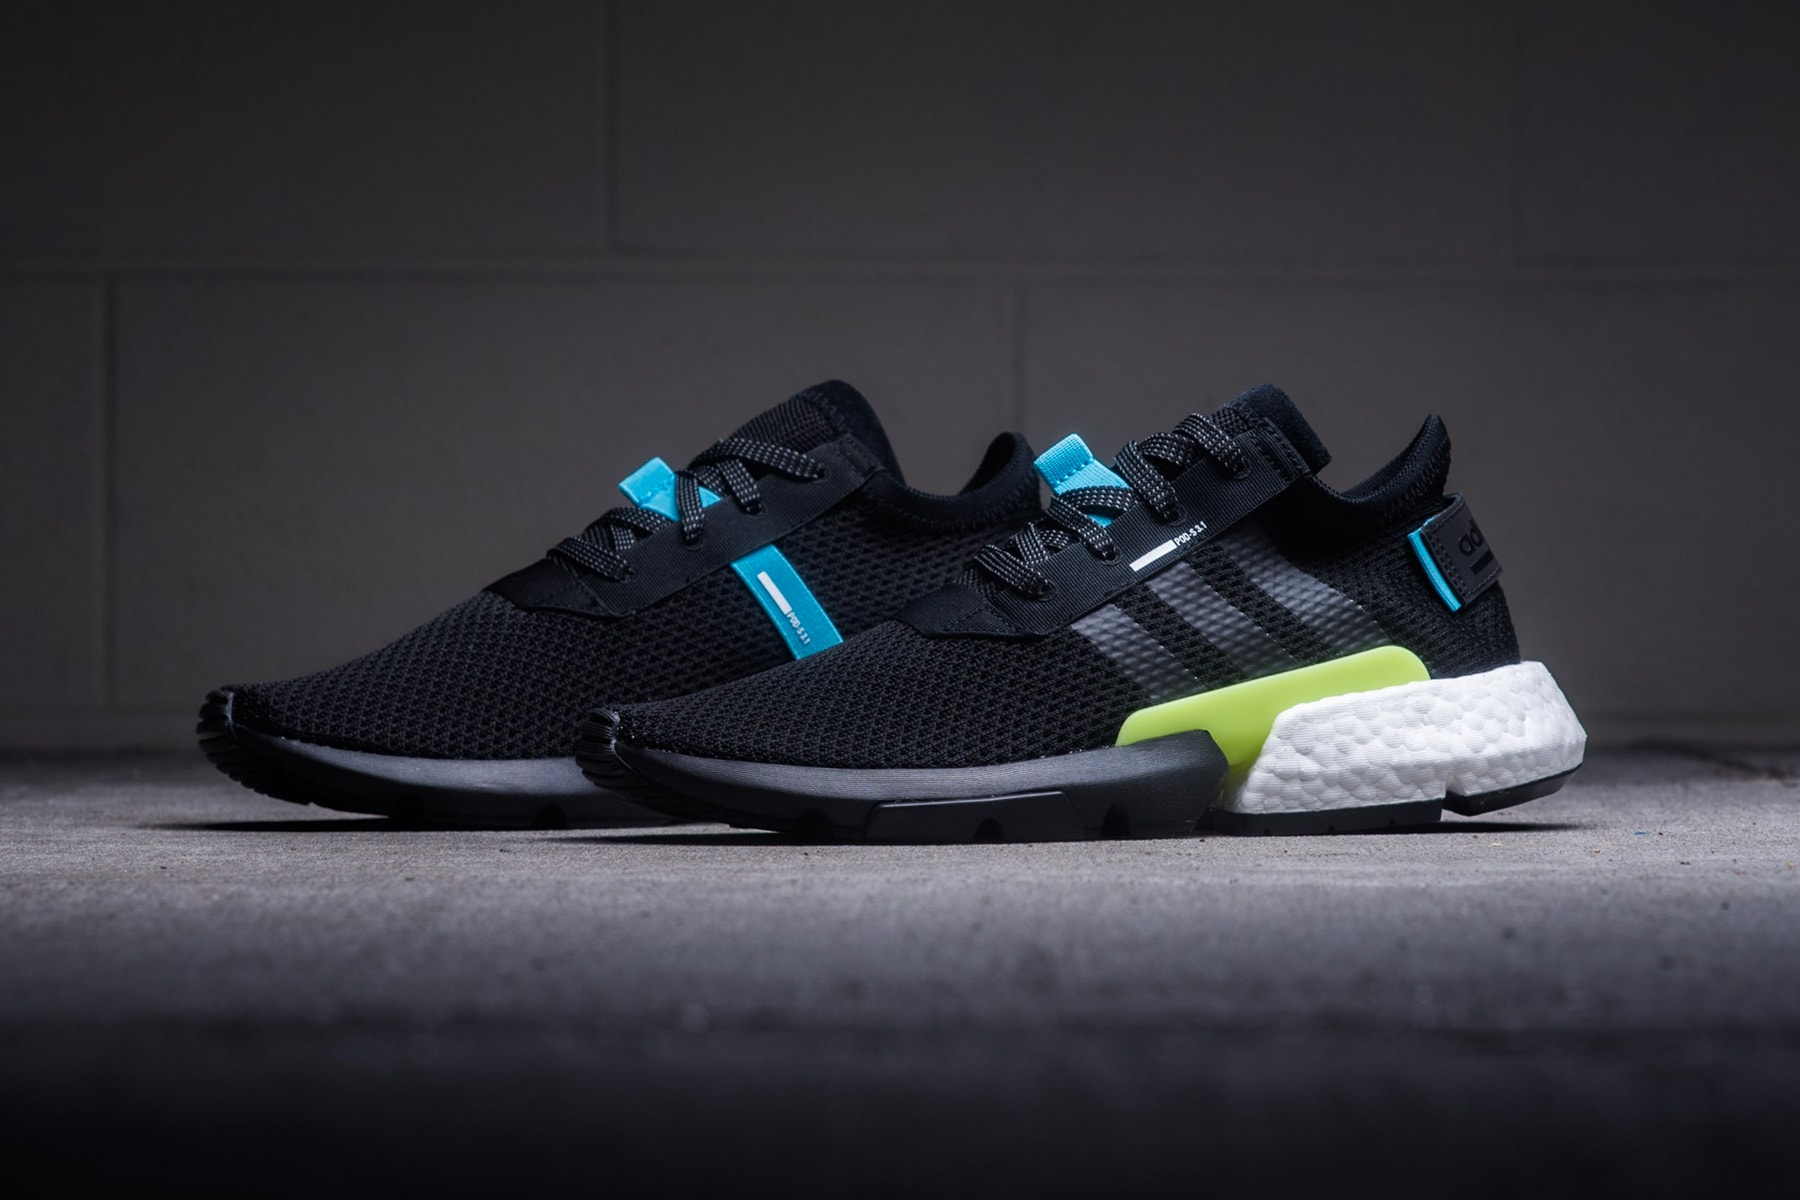 Urban Athletics - #sHOes #sHOes #sHOes An archive design inspires the  adidas POD-S3.1. The '90s-era P.O.D. System plus energy-returning Boost  gives it a progressive 3D effect and a comfortable ride. The upper